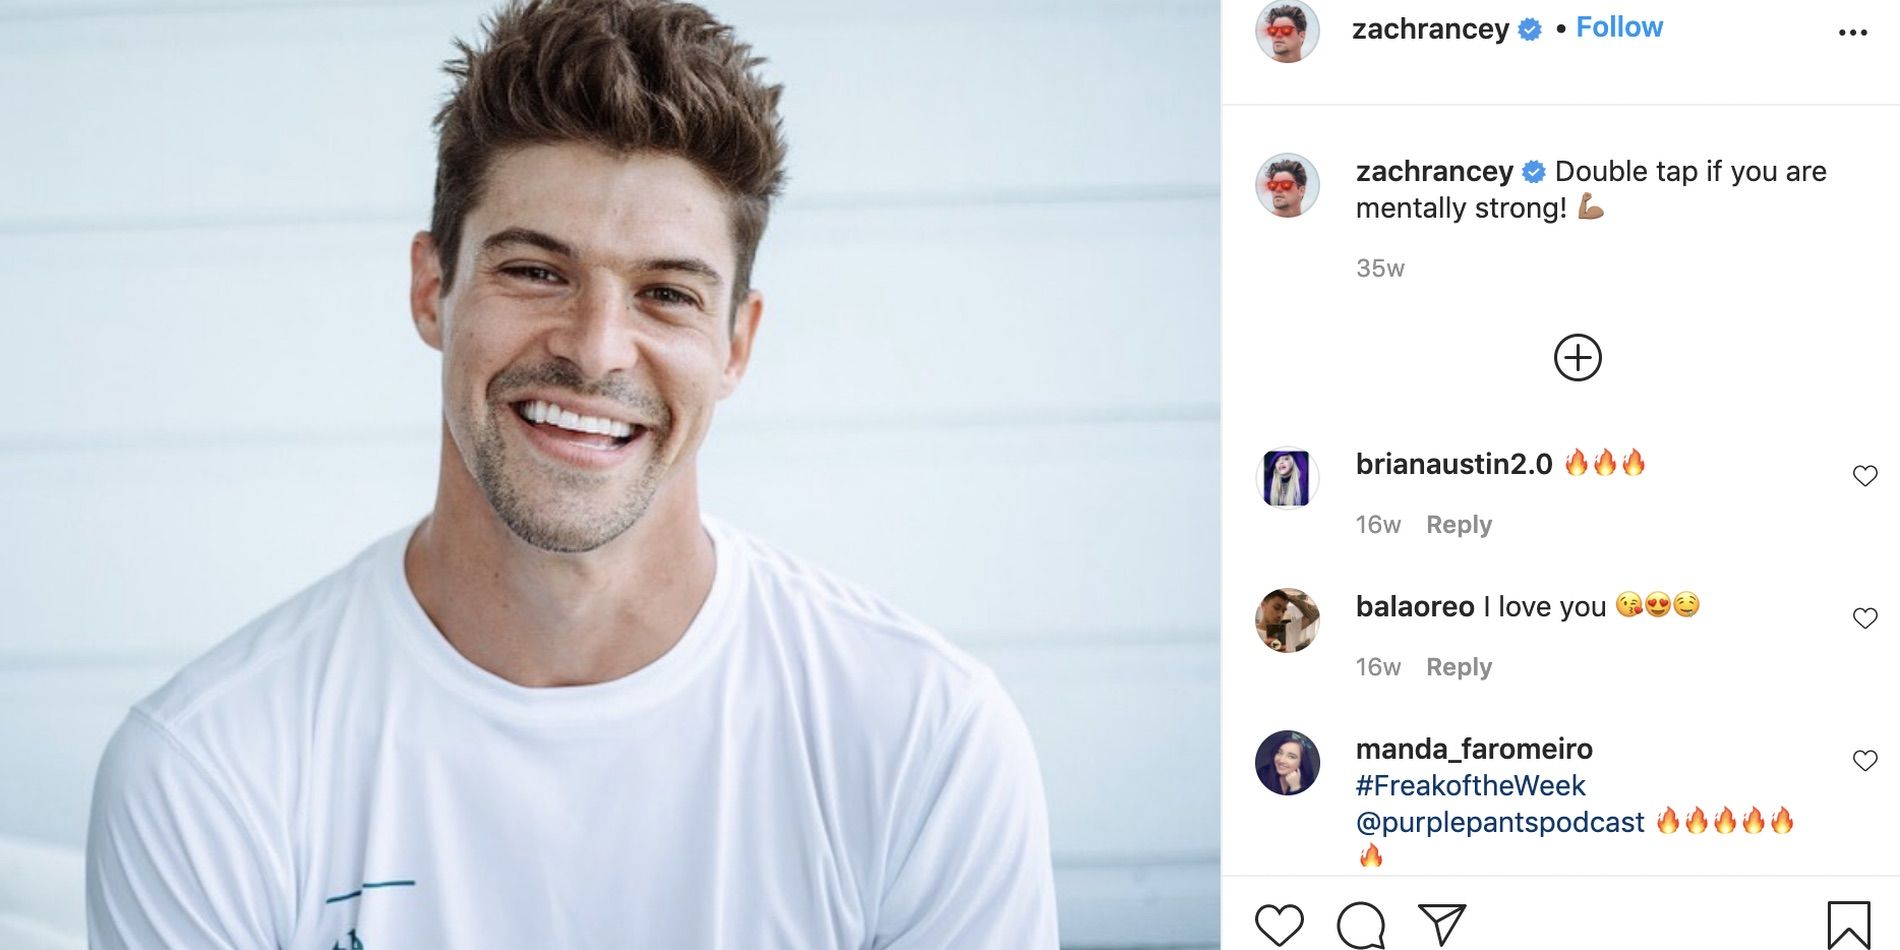 10 Most Popular Big Brother Contestants, Ranked By Instagram